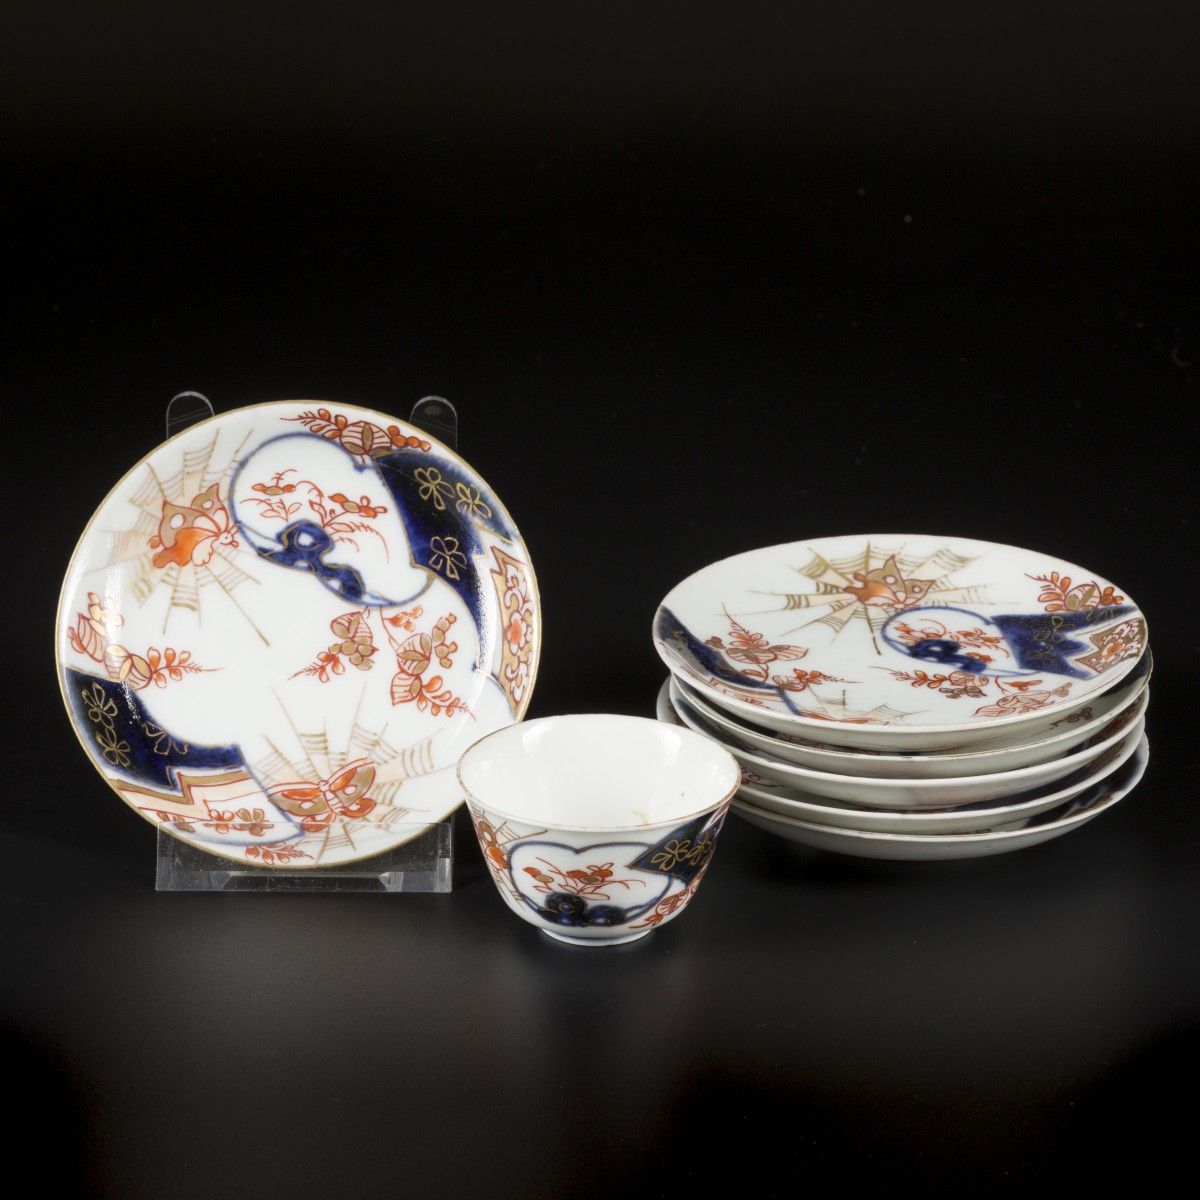 A lot of porcelain plates and a cup, all with Imari decoration. Japan, 18th cent&hellip;